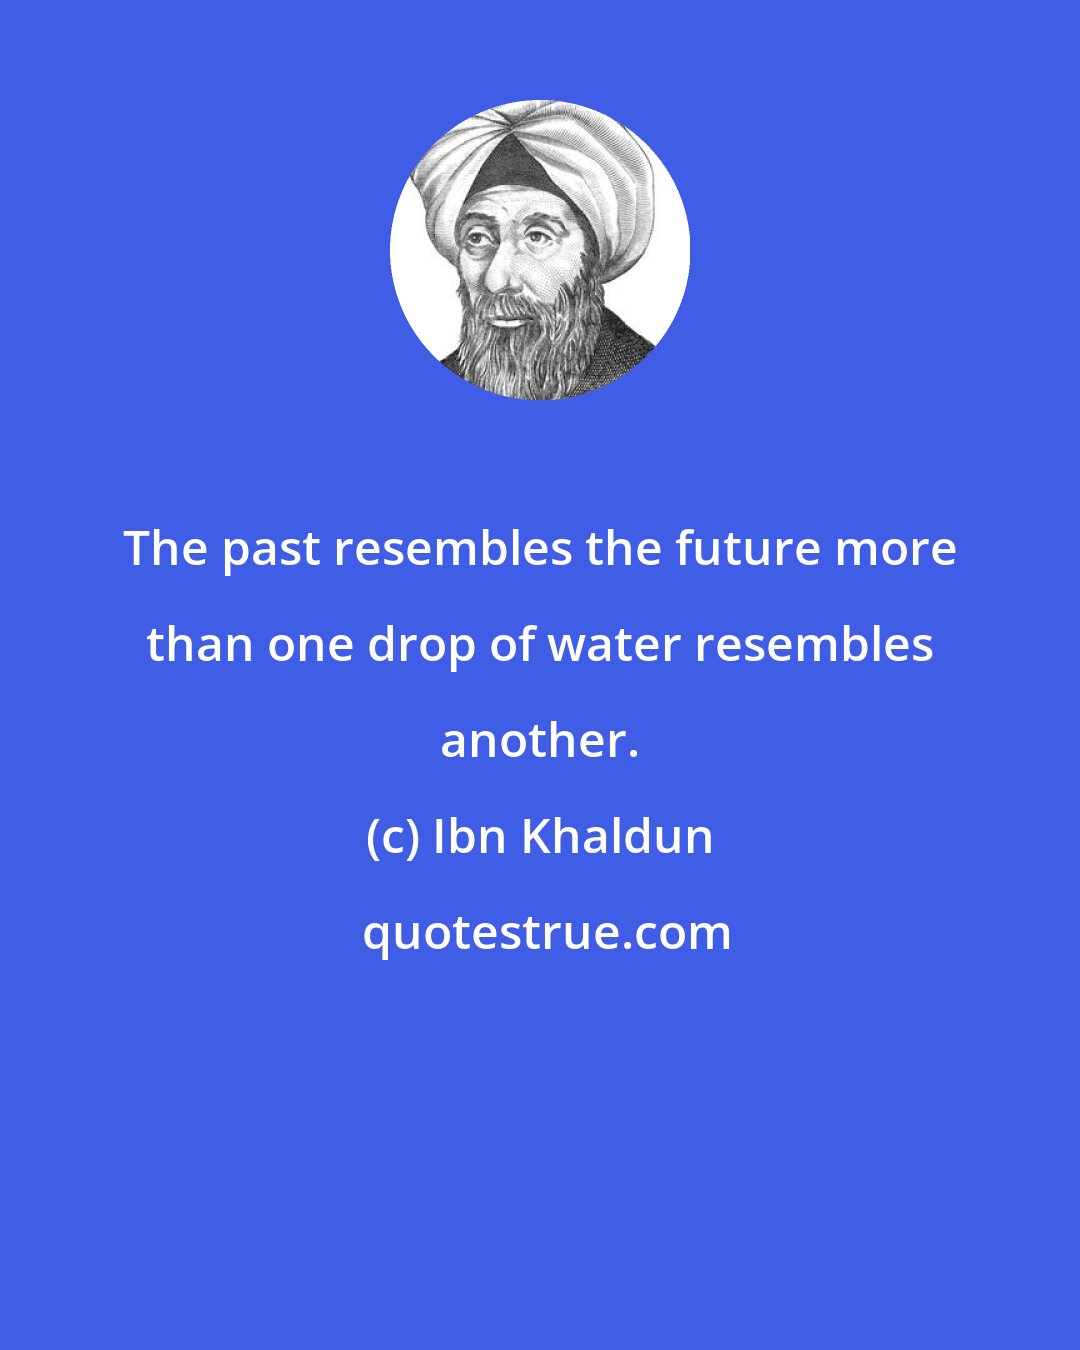 Ibn Khaldun: The past resembles the future more than one drop of water resembles another.